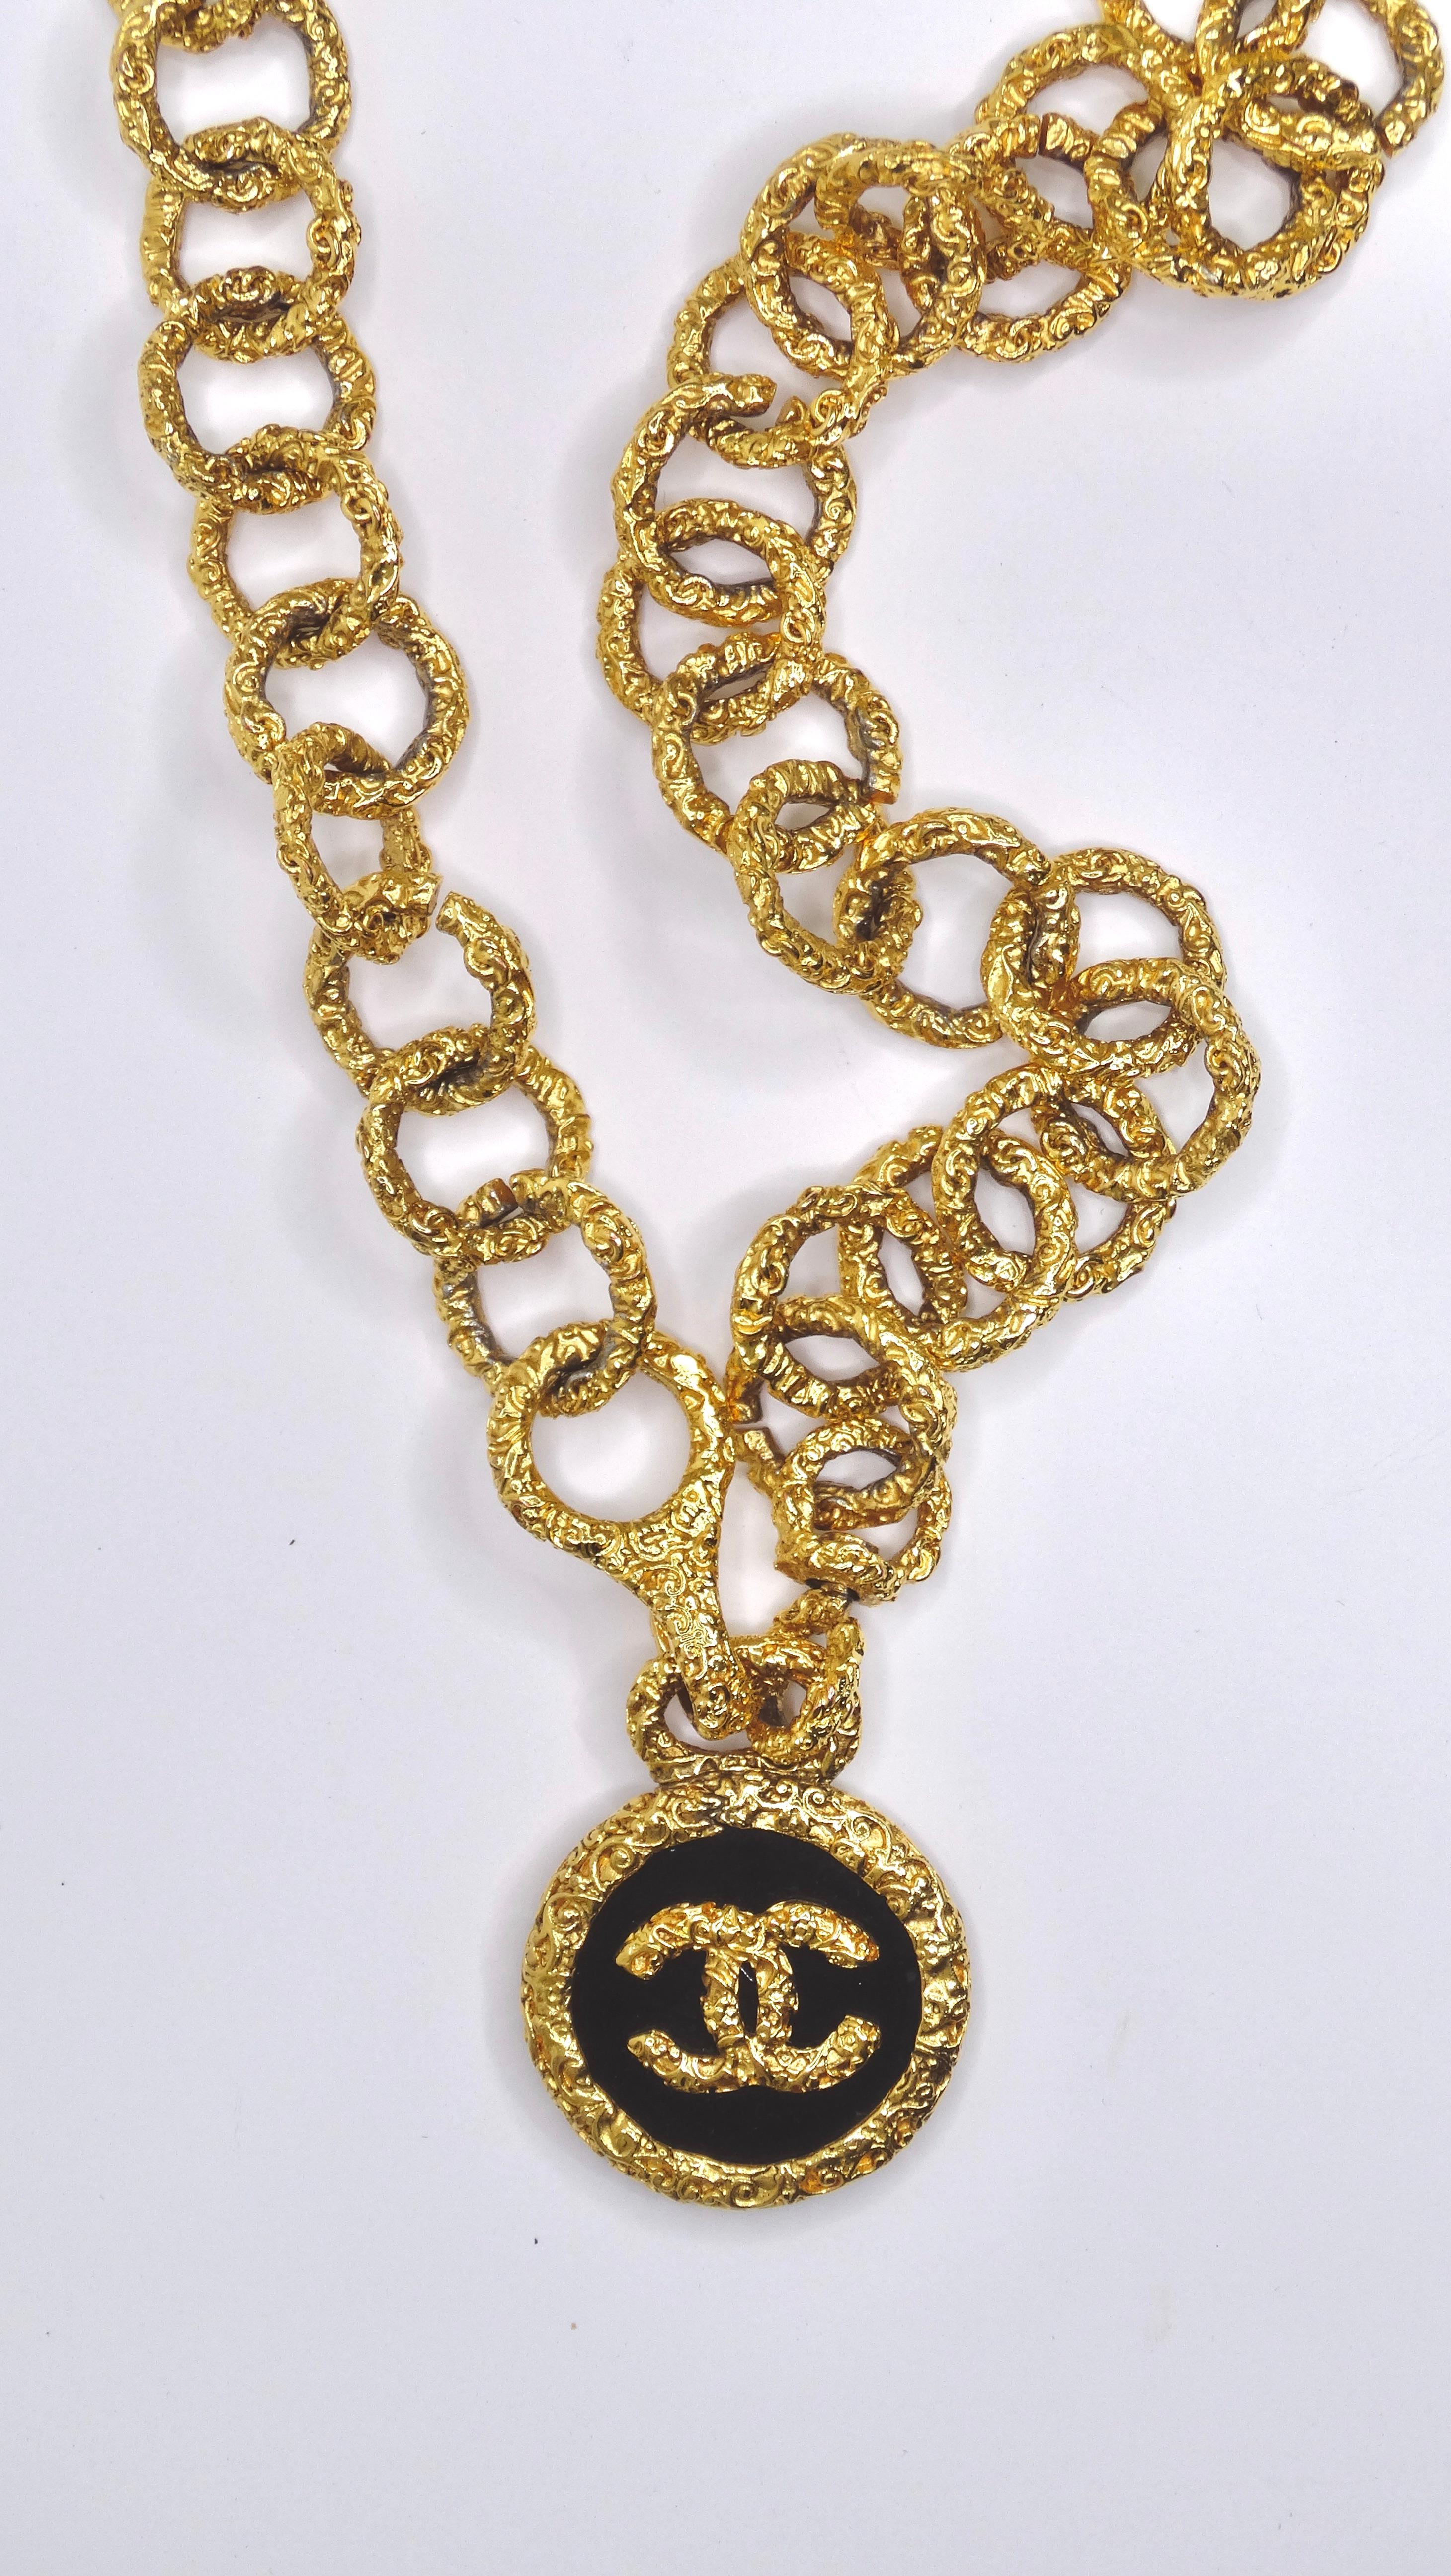 Don't miss out on the chance to get your hands on this chunky and versatile gem from the iconic Chanel! Wear this as a belt, or a necklace to create your very own unique look. Always remember to have fun with fashion, it's not that serious! Features